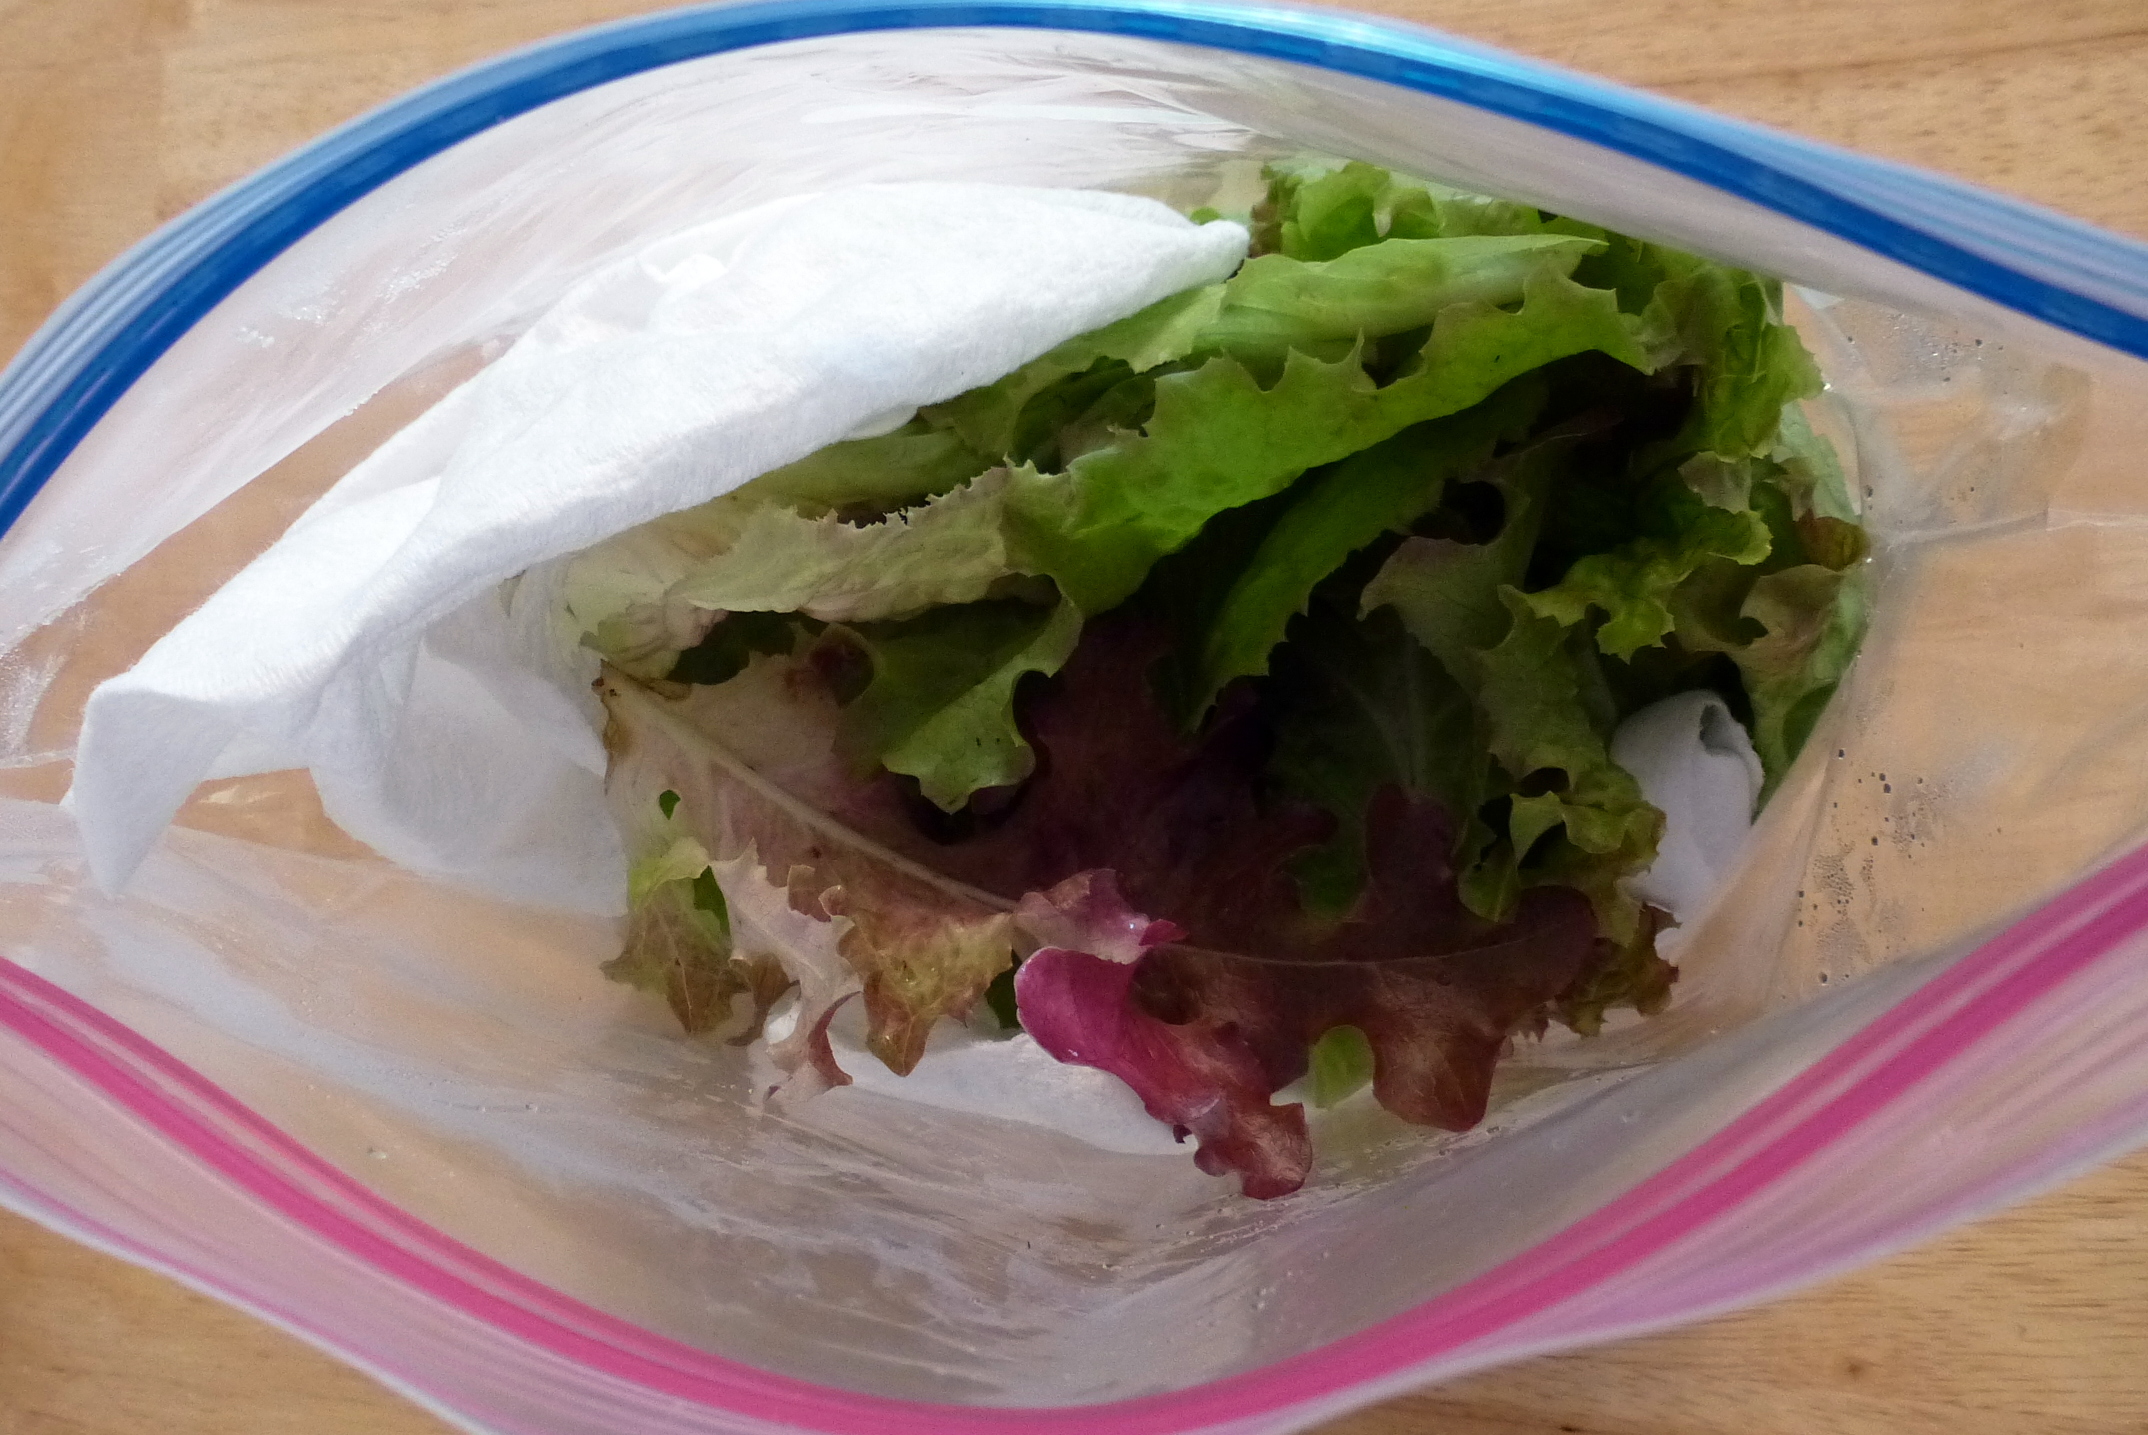 How To Grow Salad In Plastic Bags